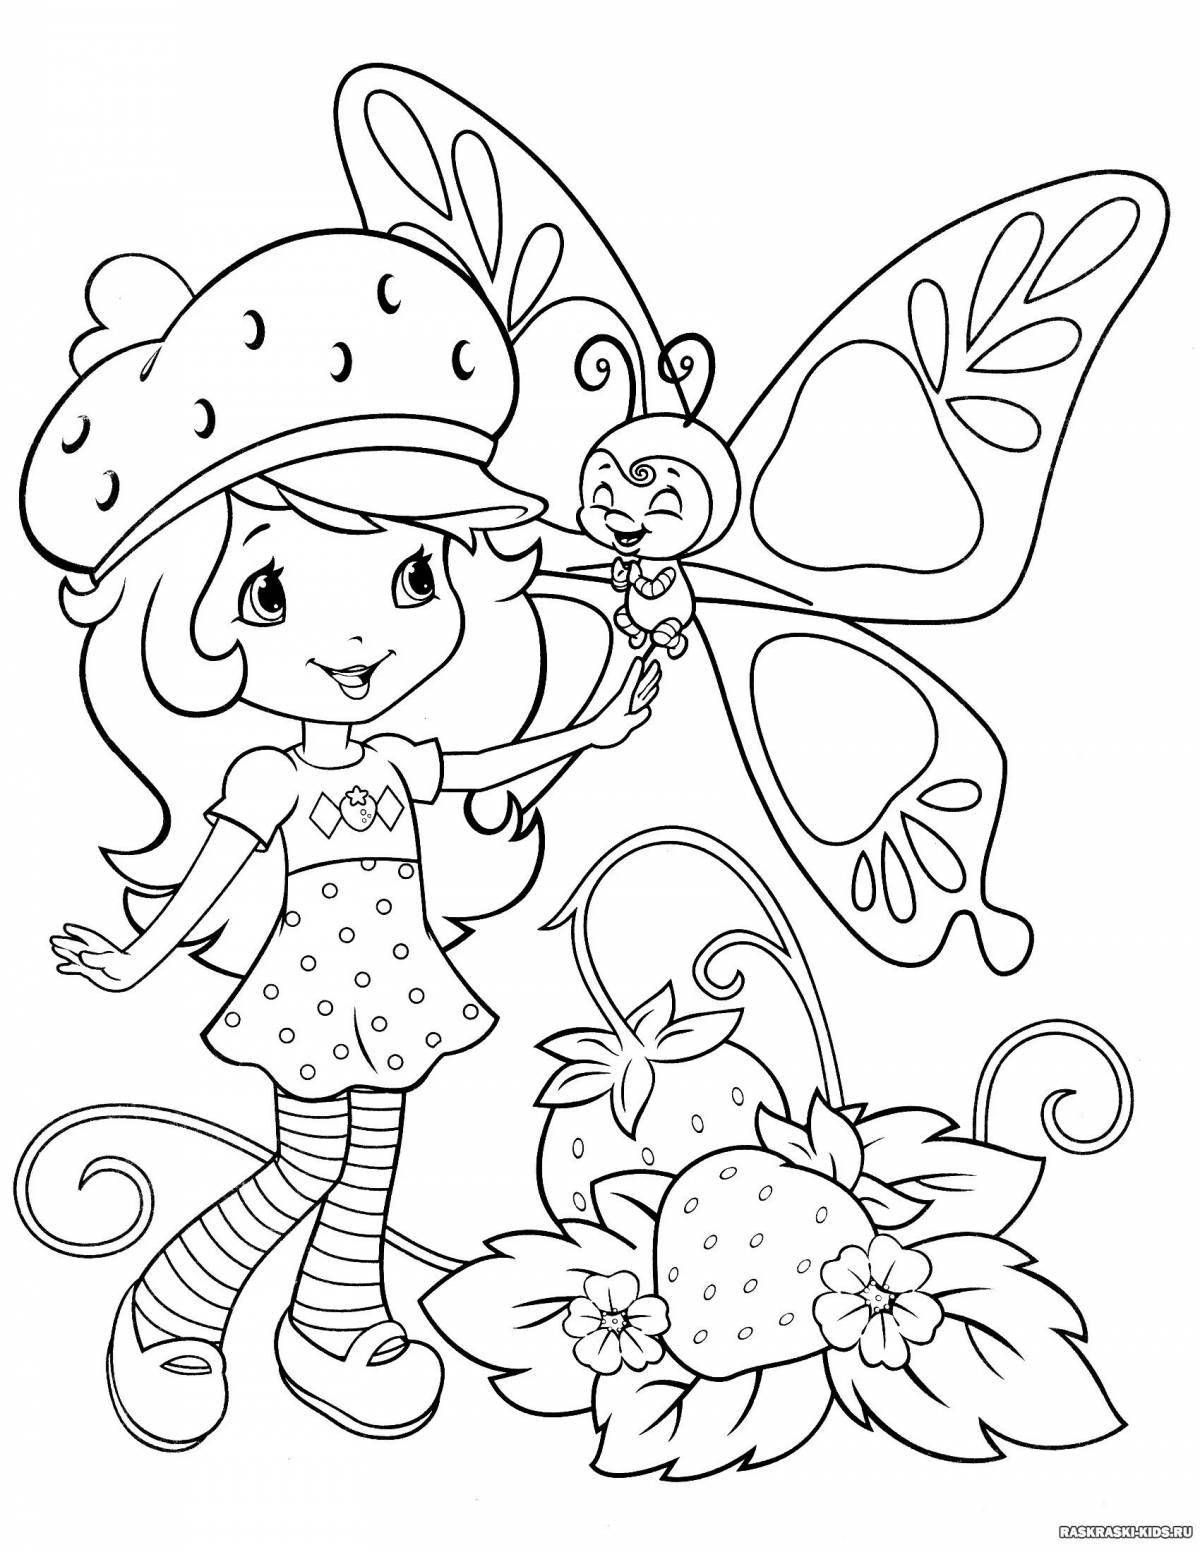 Fun coloring book for girls 7 years old